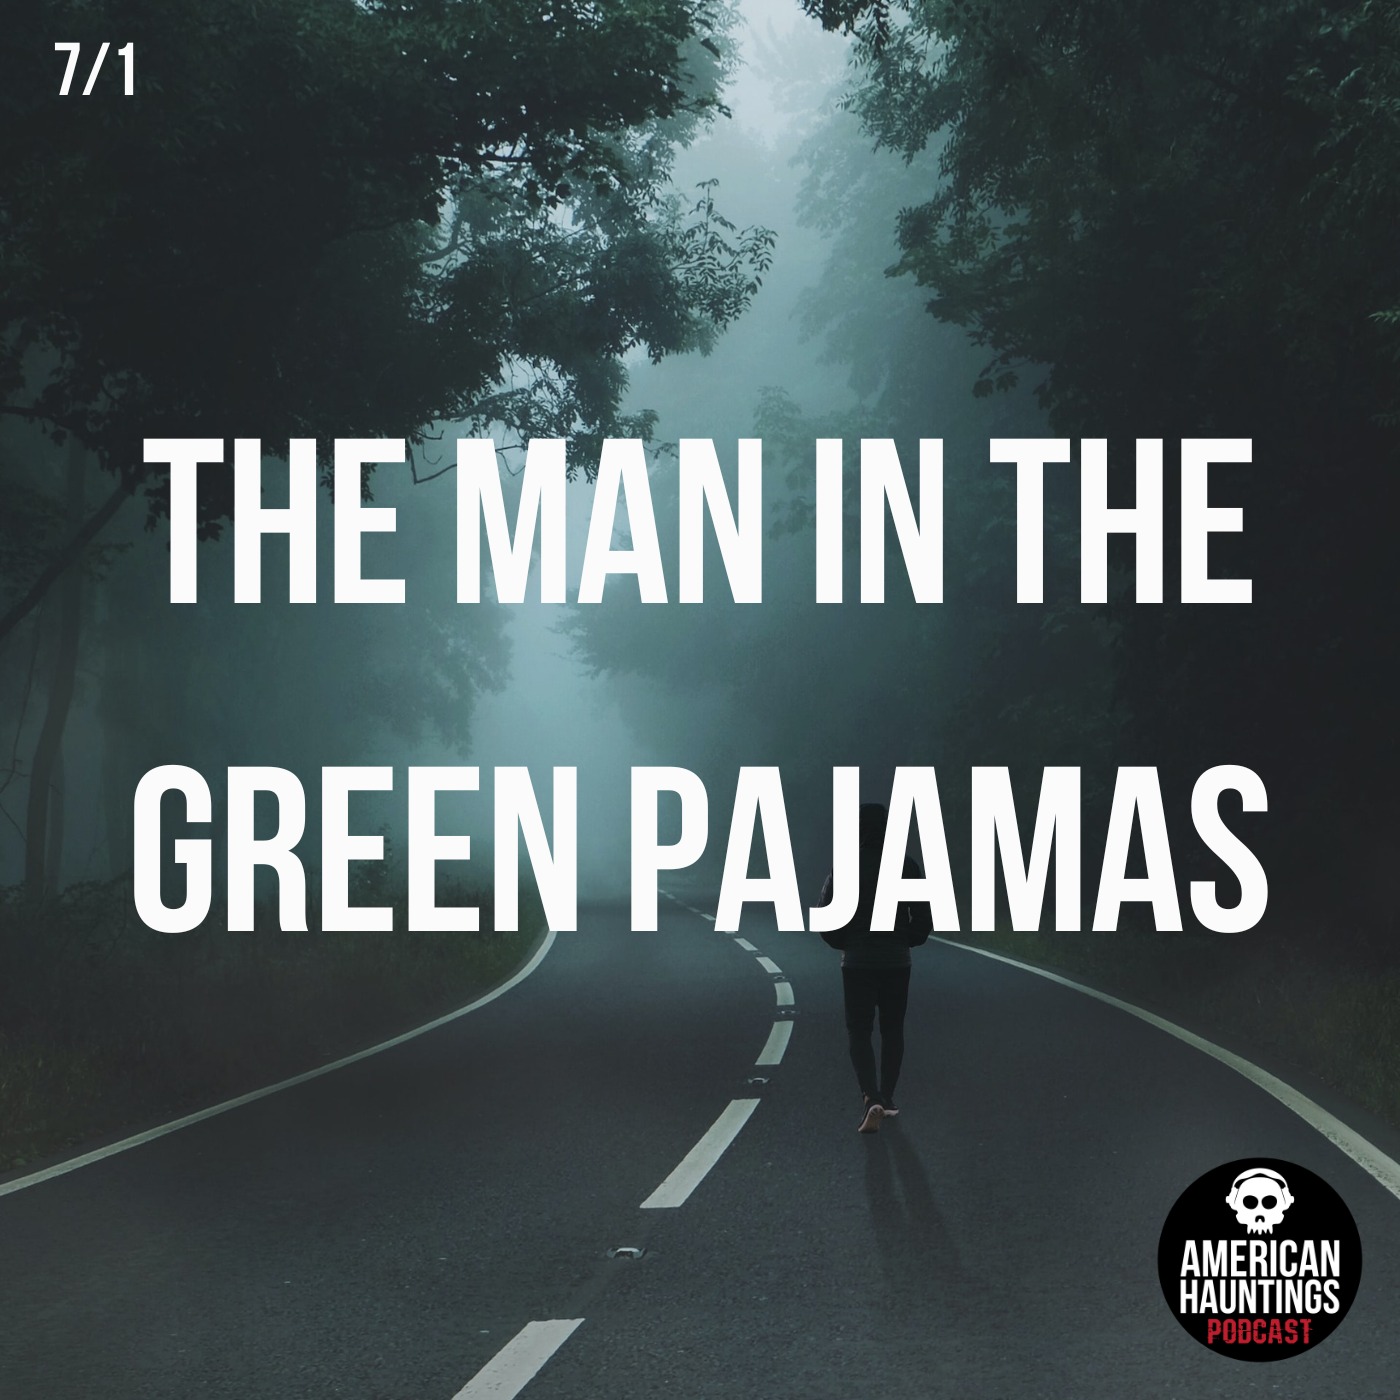 The Man In The Green Pajamas